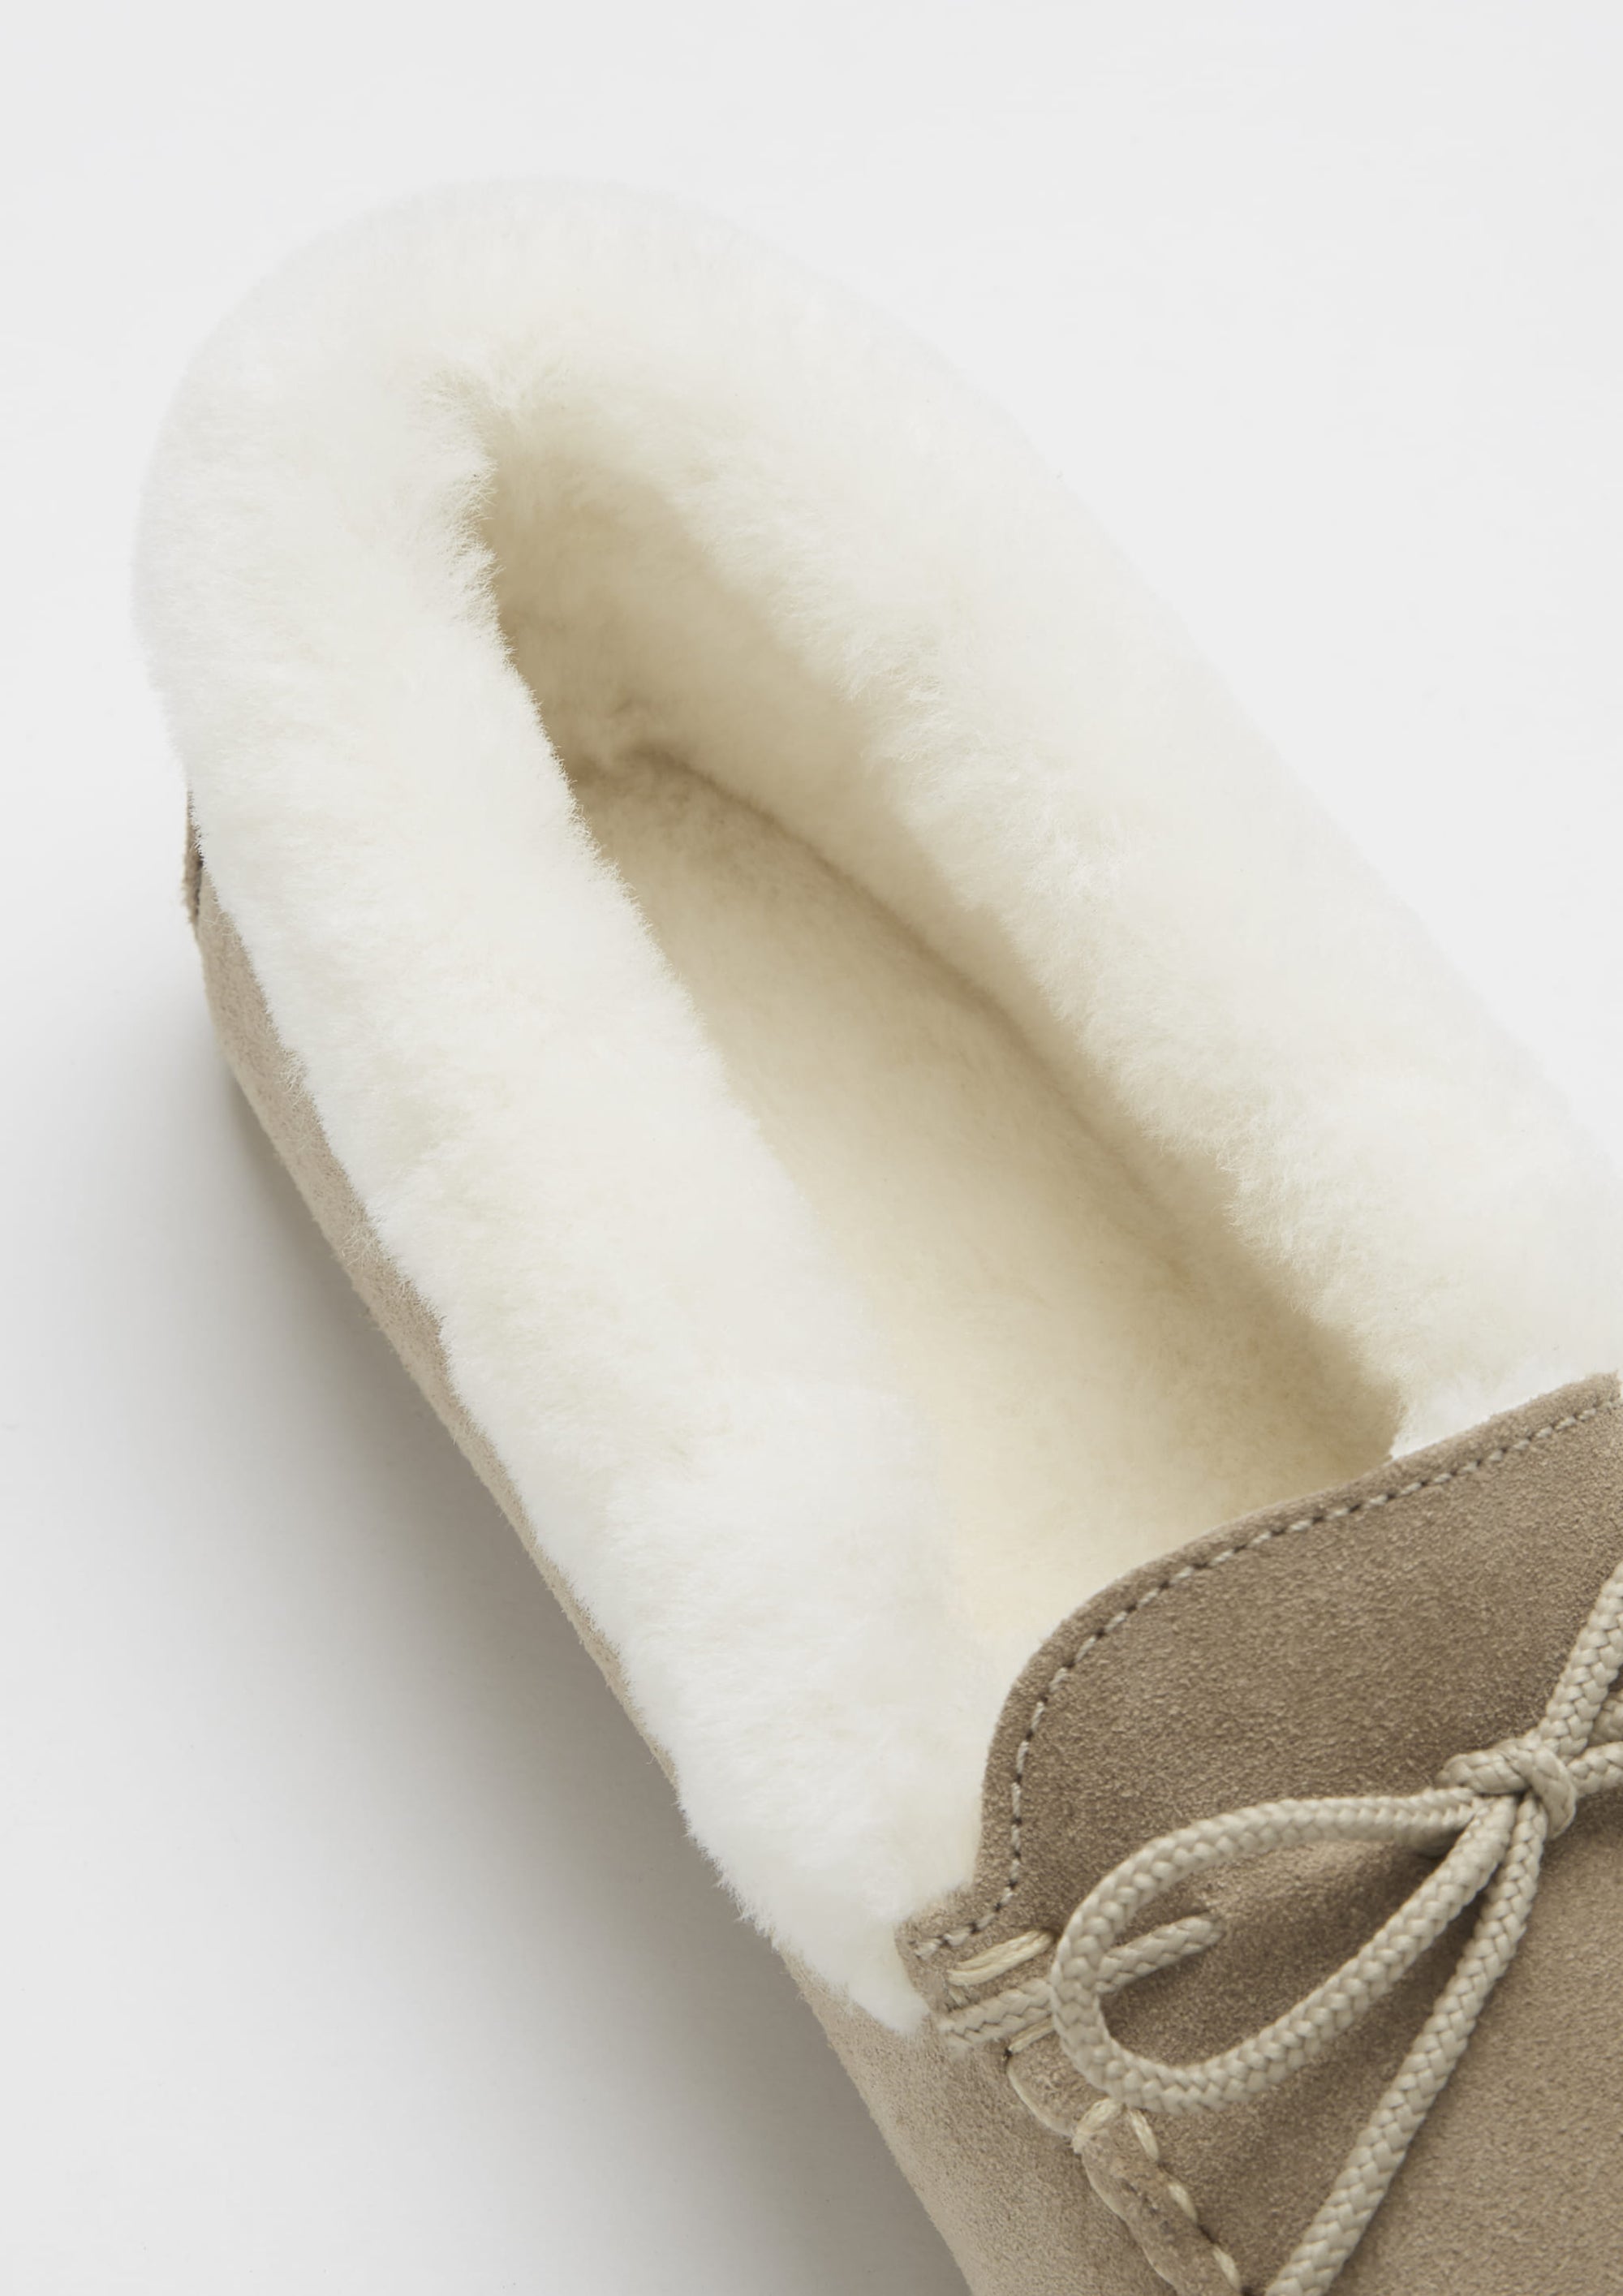 Women's slippers, sheepskin, taupe suede